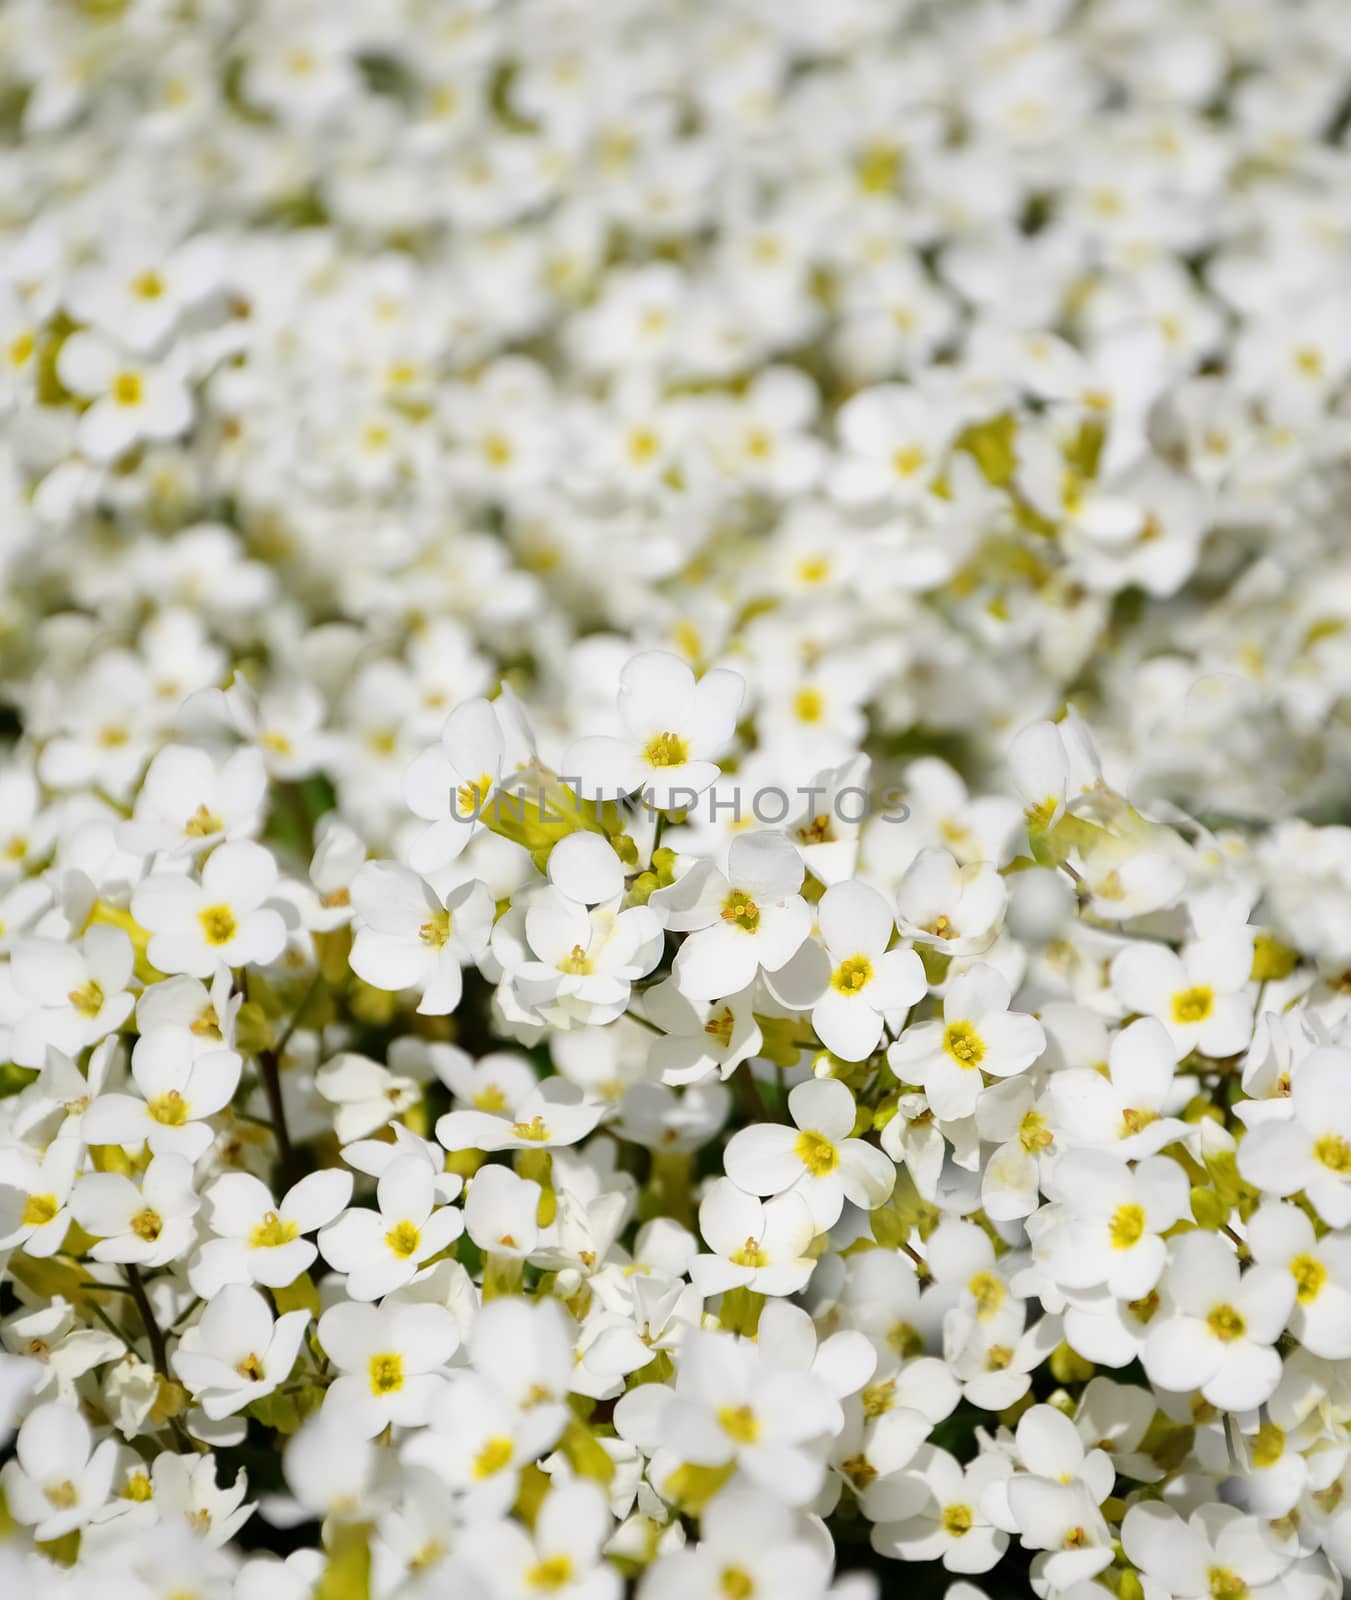 medow with white flowers